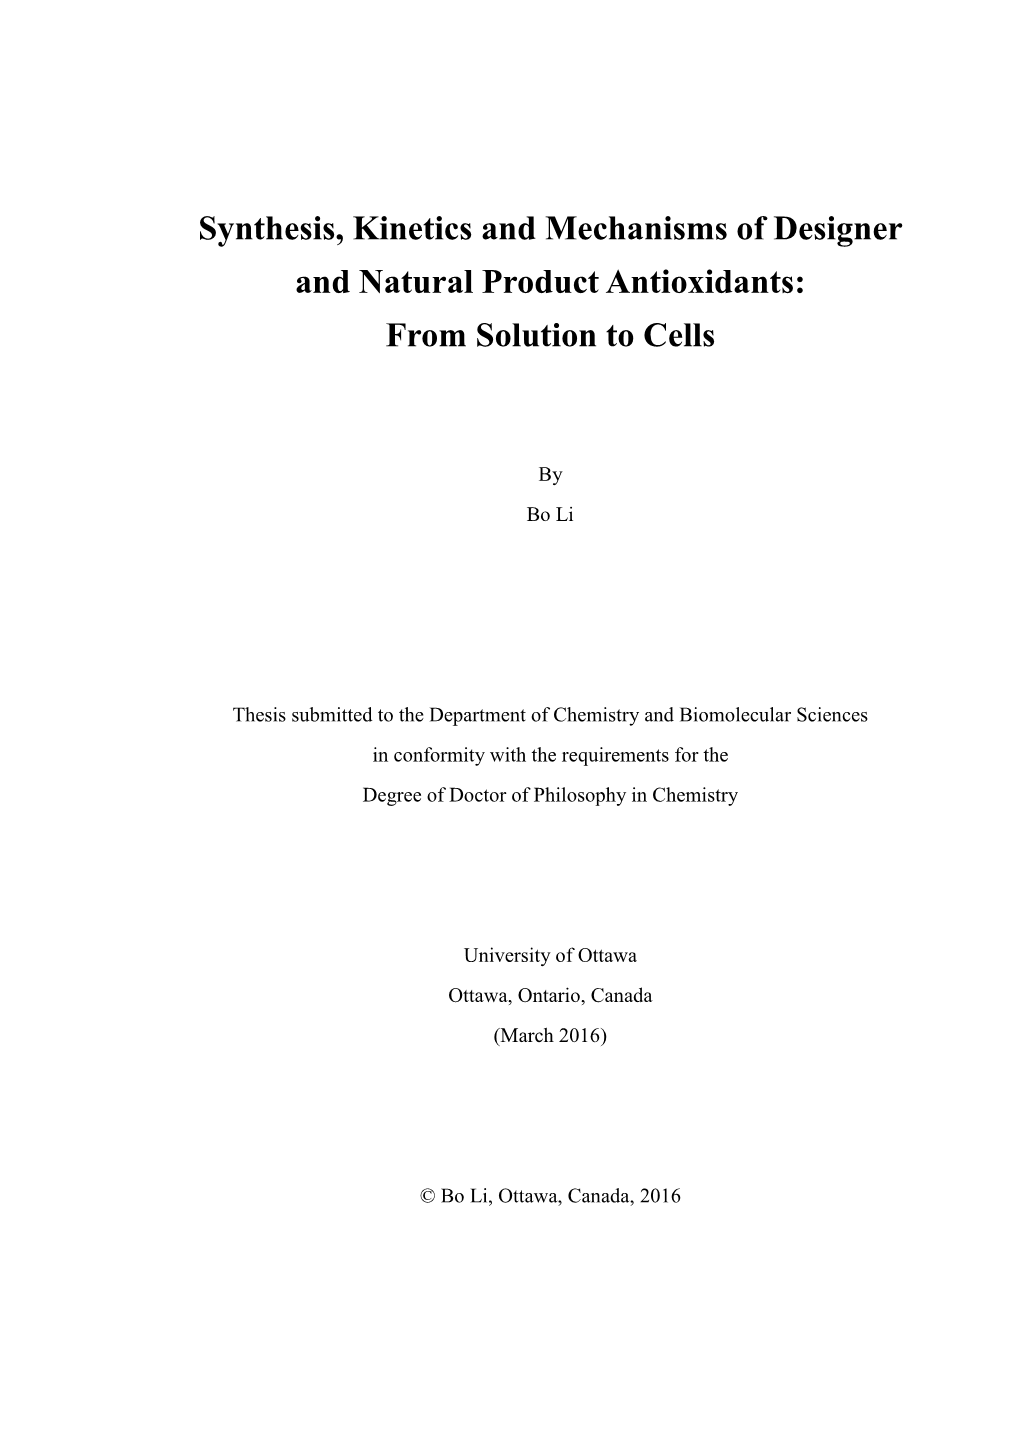 Synthesis, Kinetics and Mechanisms of Designer and Natural Product Antioxidants: from Solution to Cells